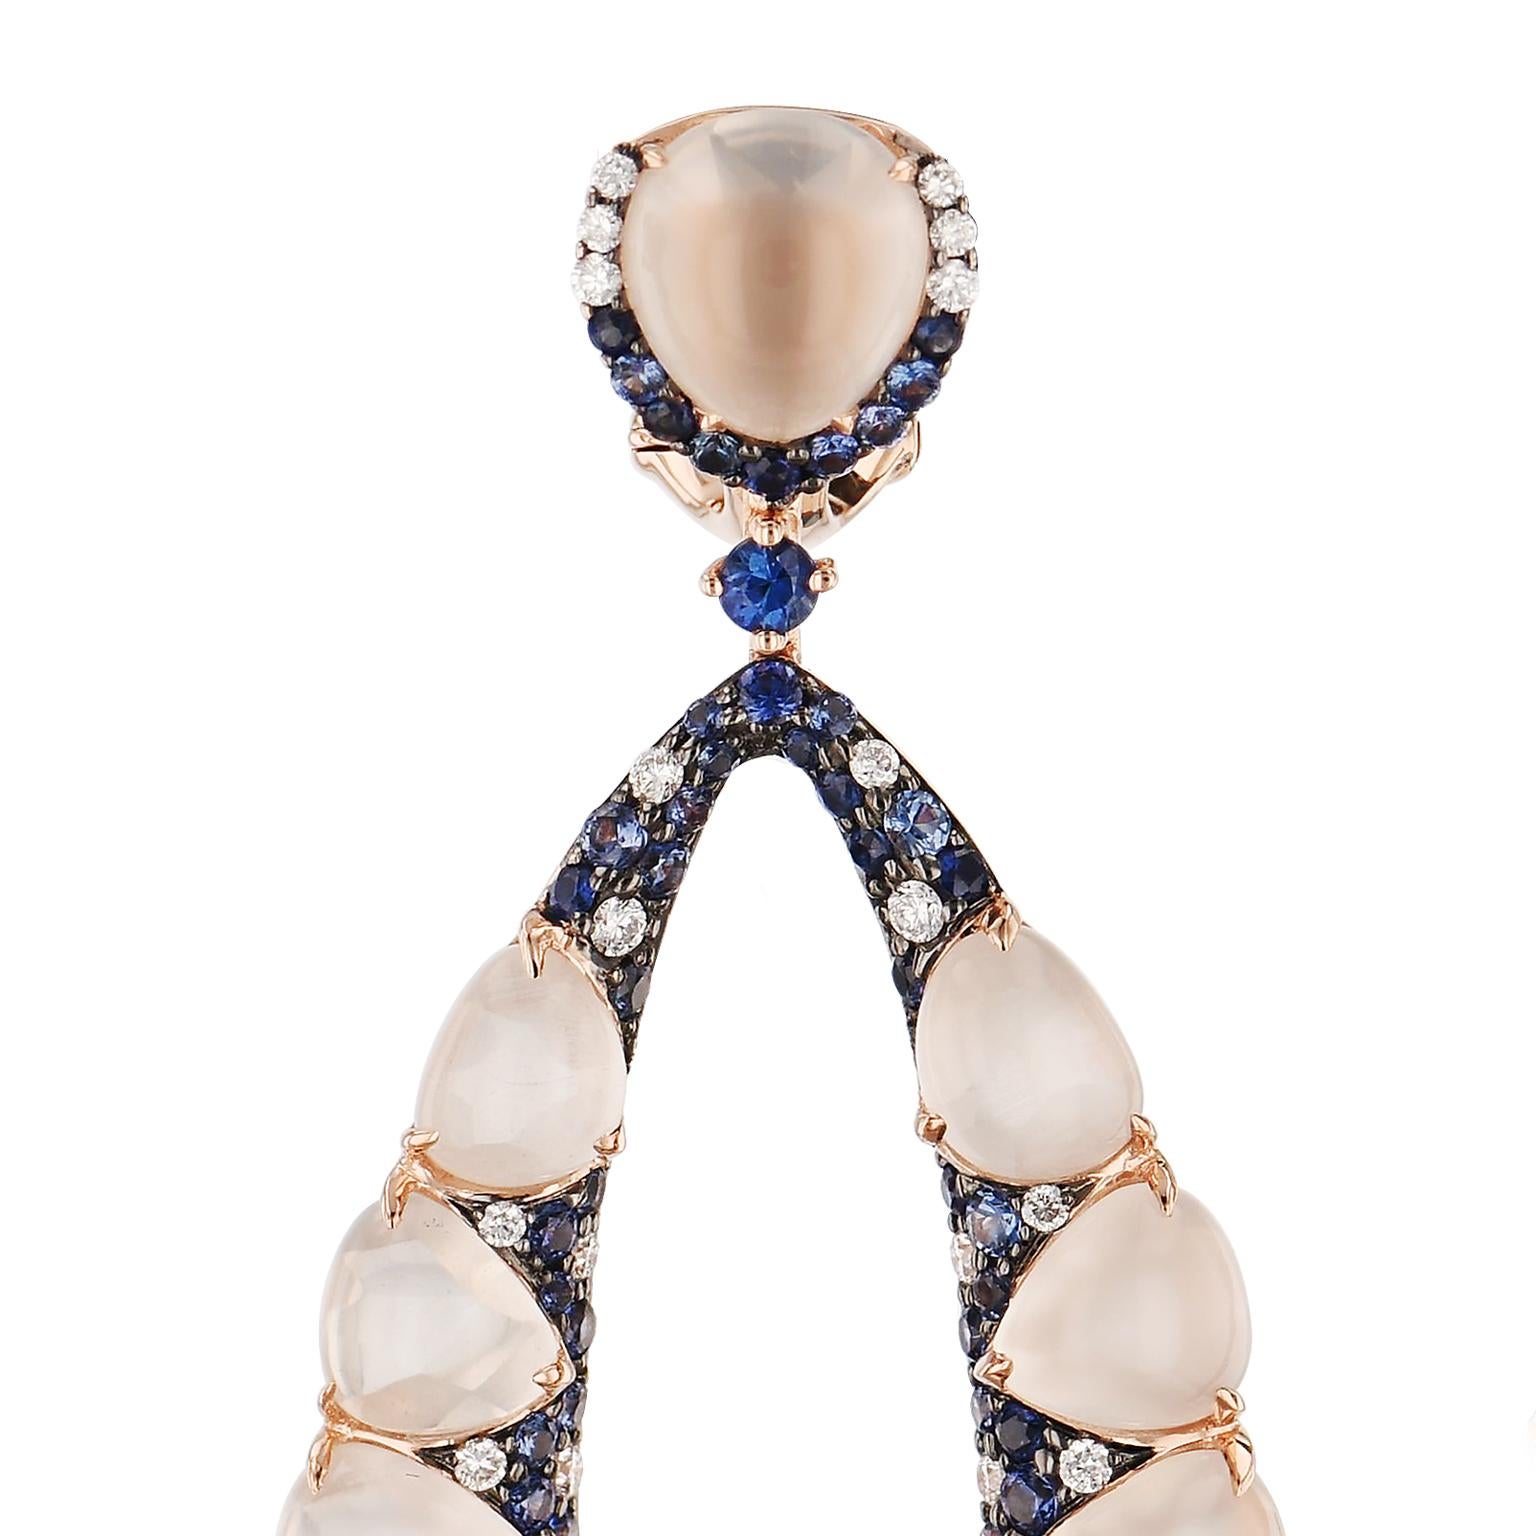 Adorned with sapphires(2.57 carats in total weight) and diamonds (0.73 carats in total weight), these 18 karat rose gold earrings share the brilliance of moonlight captured in cabochon cut moonstones with a total weight of 33.86 carats. 